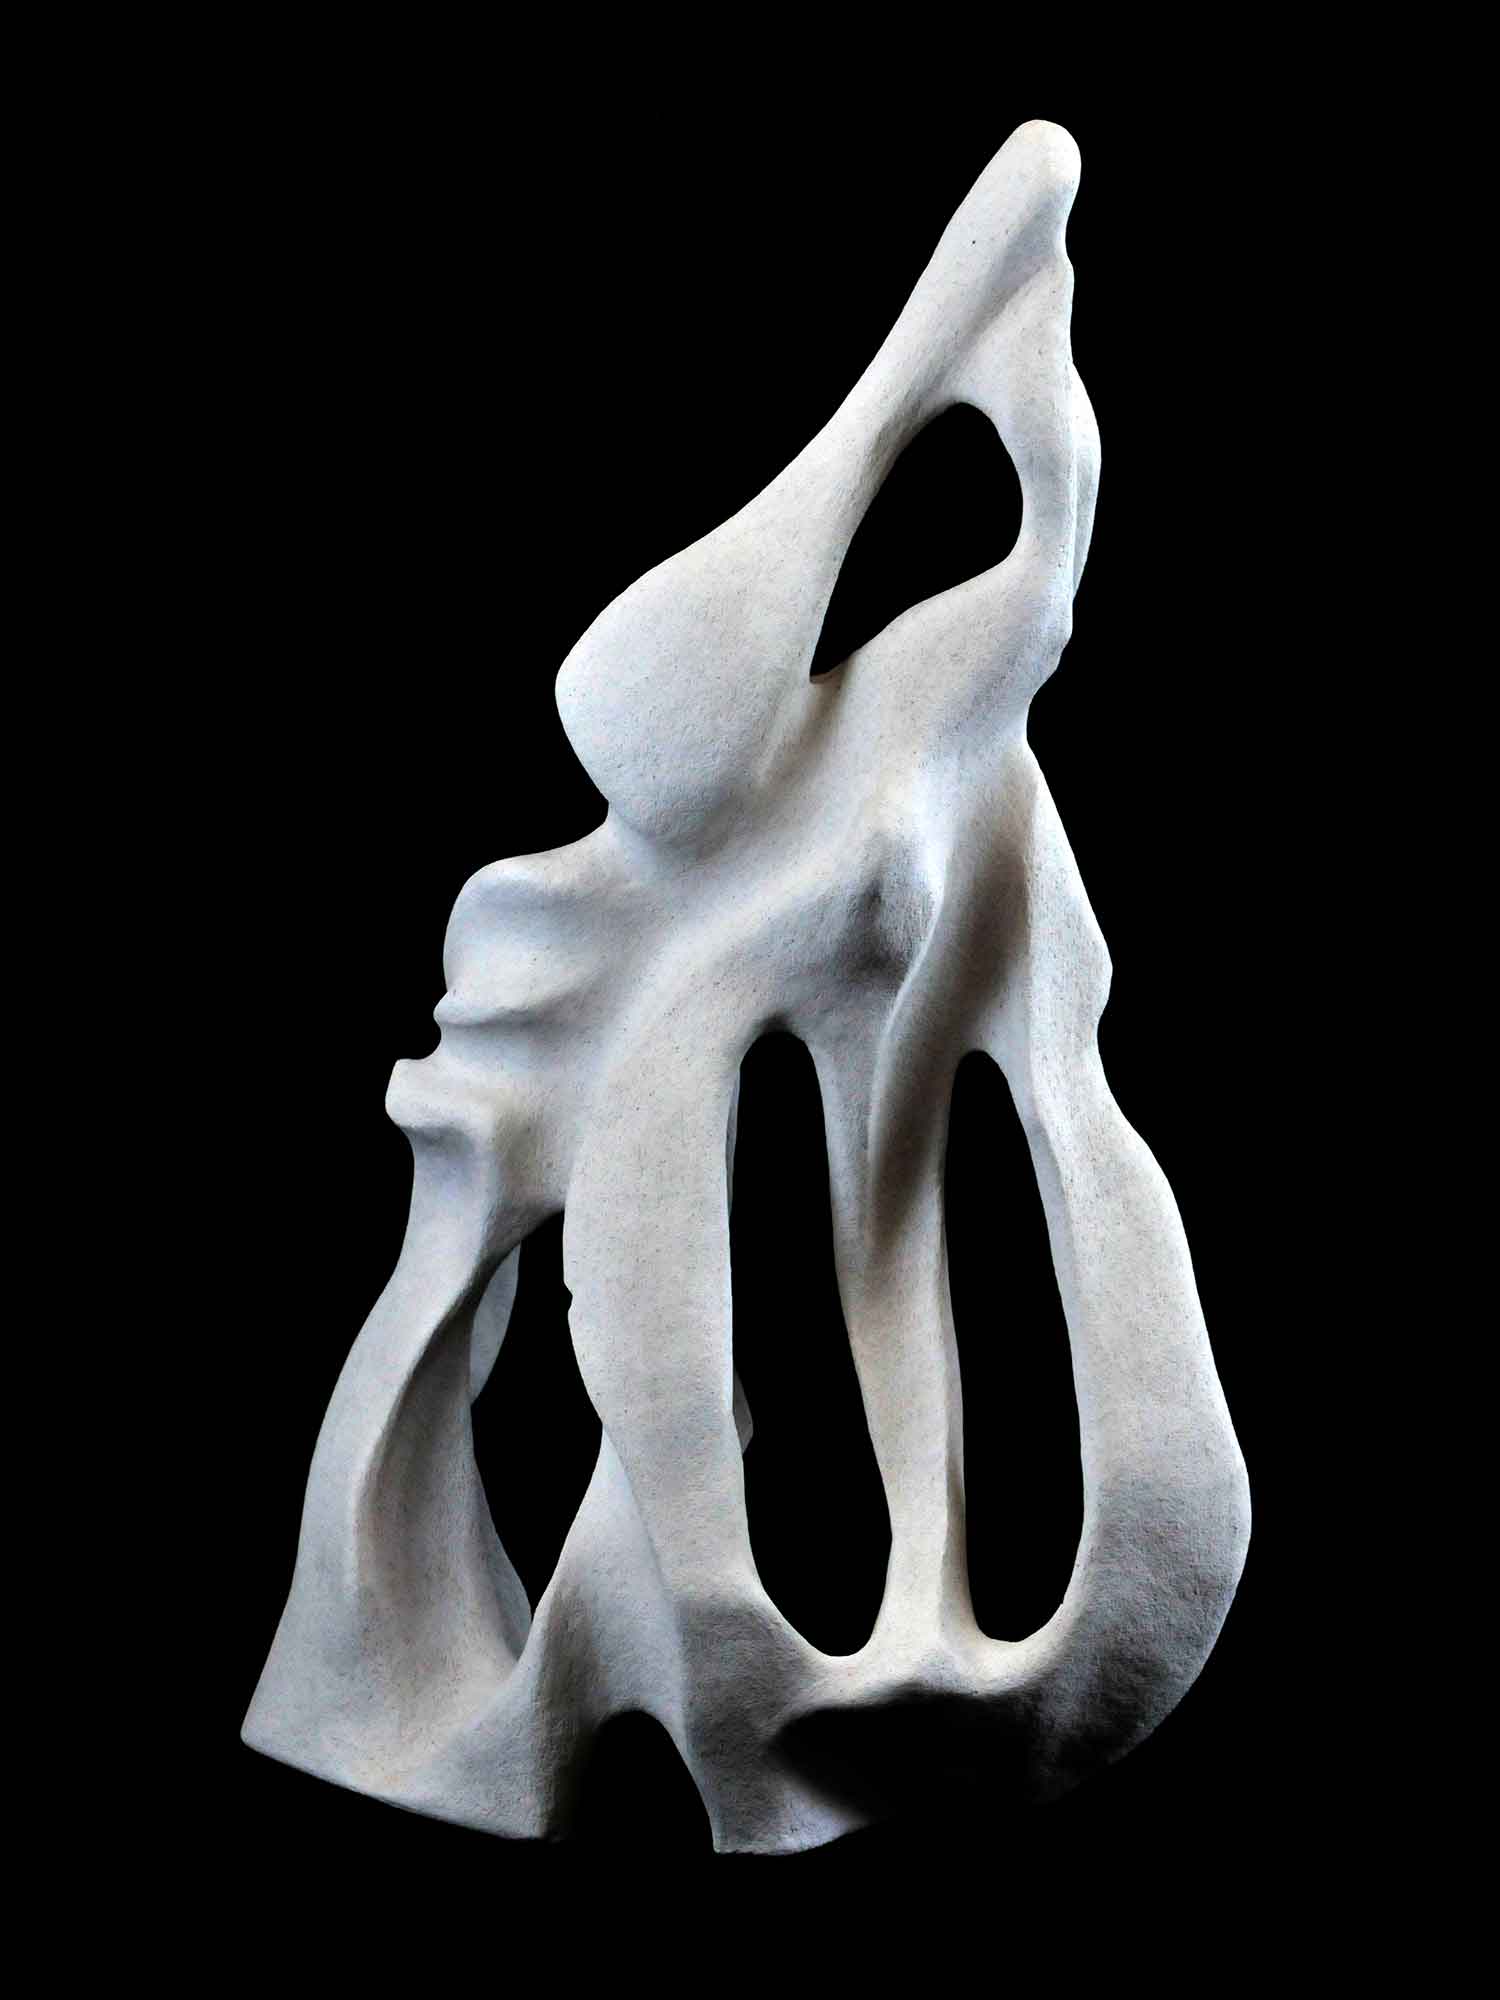 Sculpture of organic forms